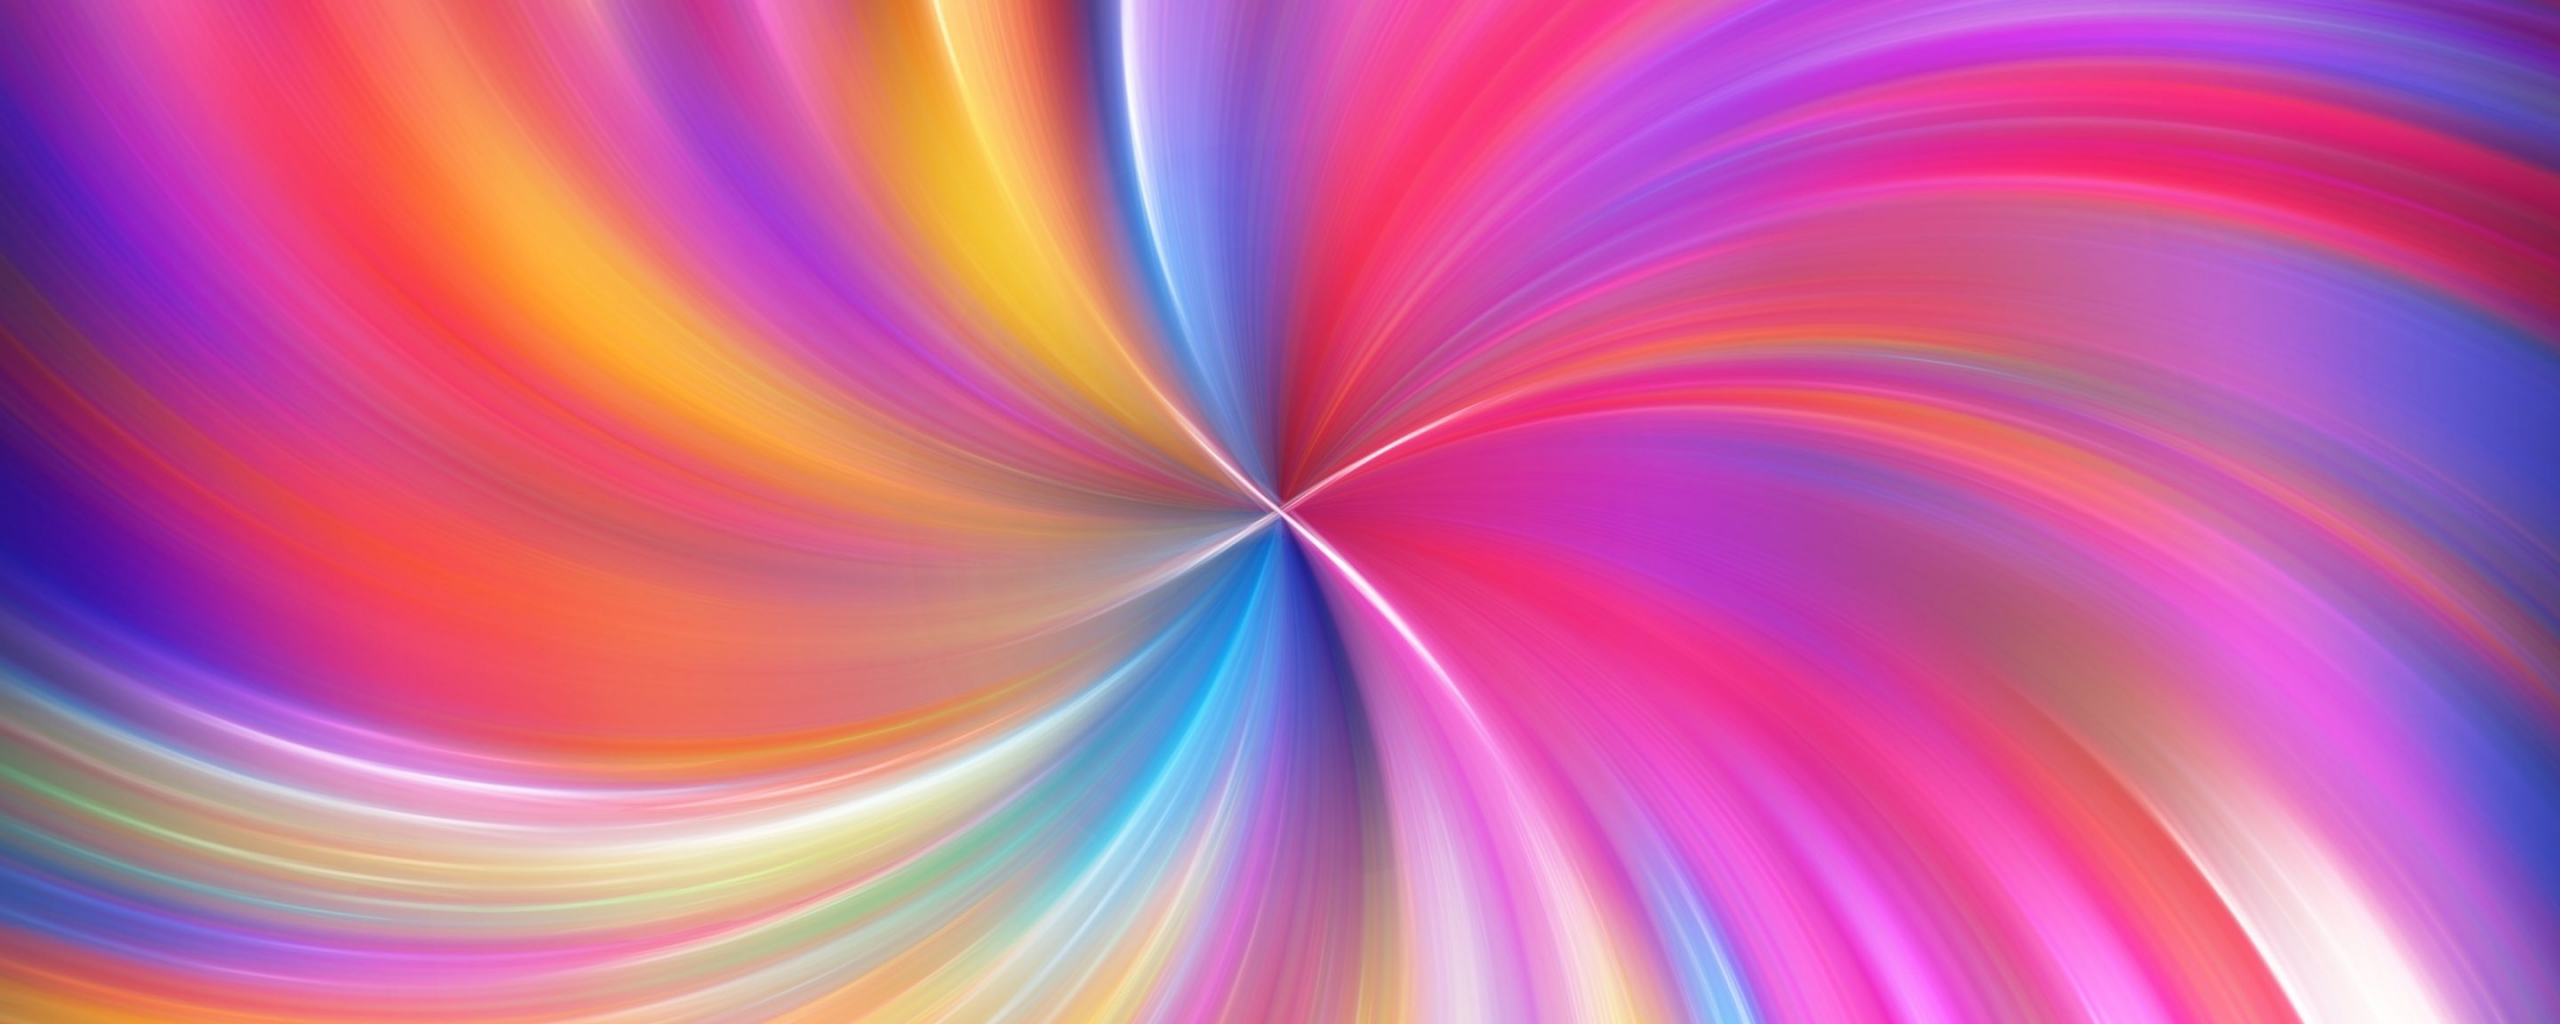 Swirl, colorful, abstraction, 2560x1024 wallpaper